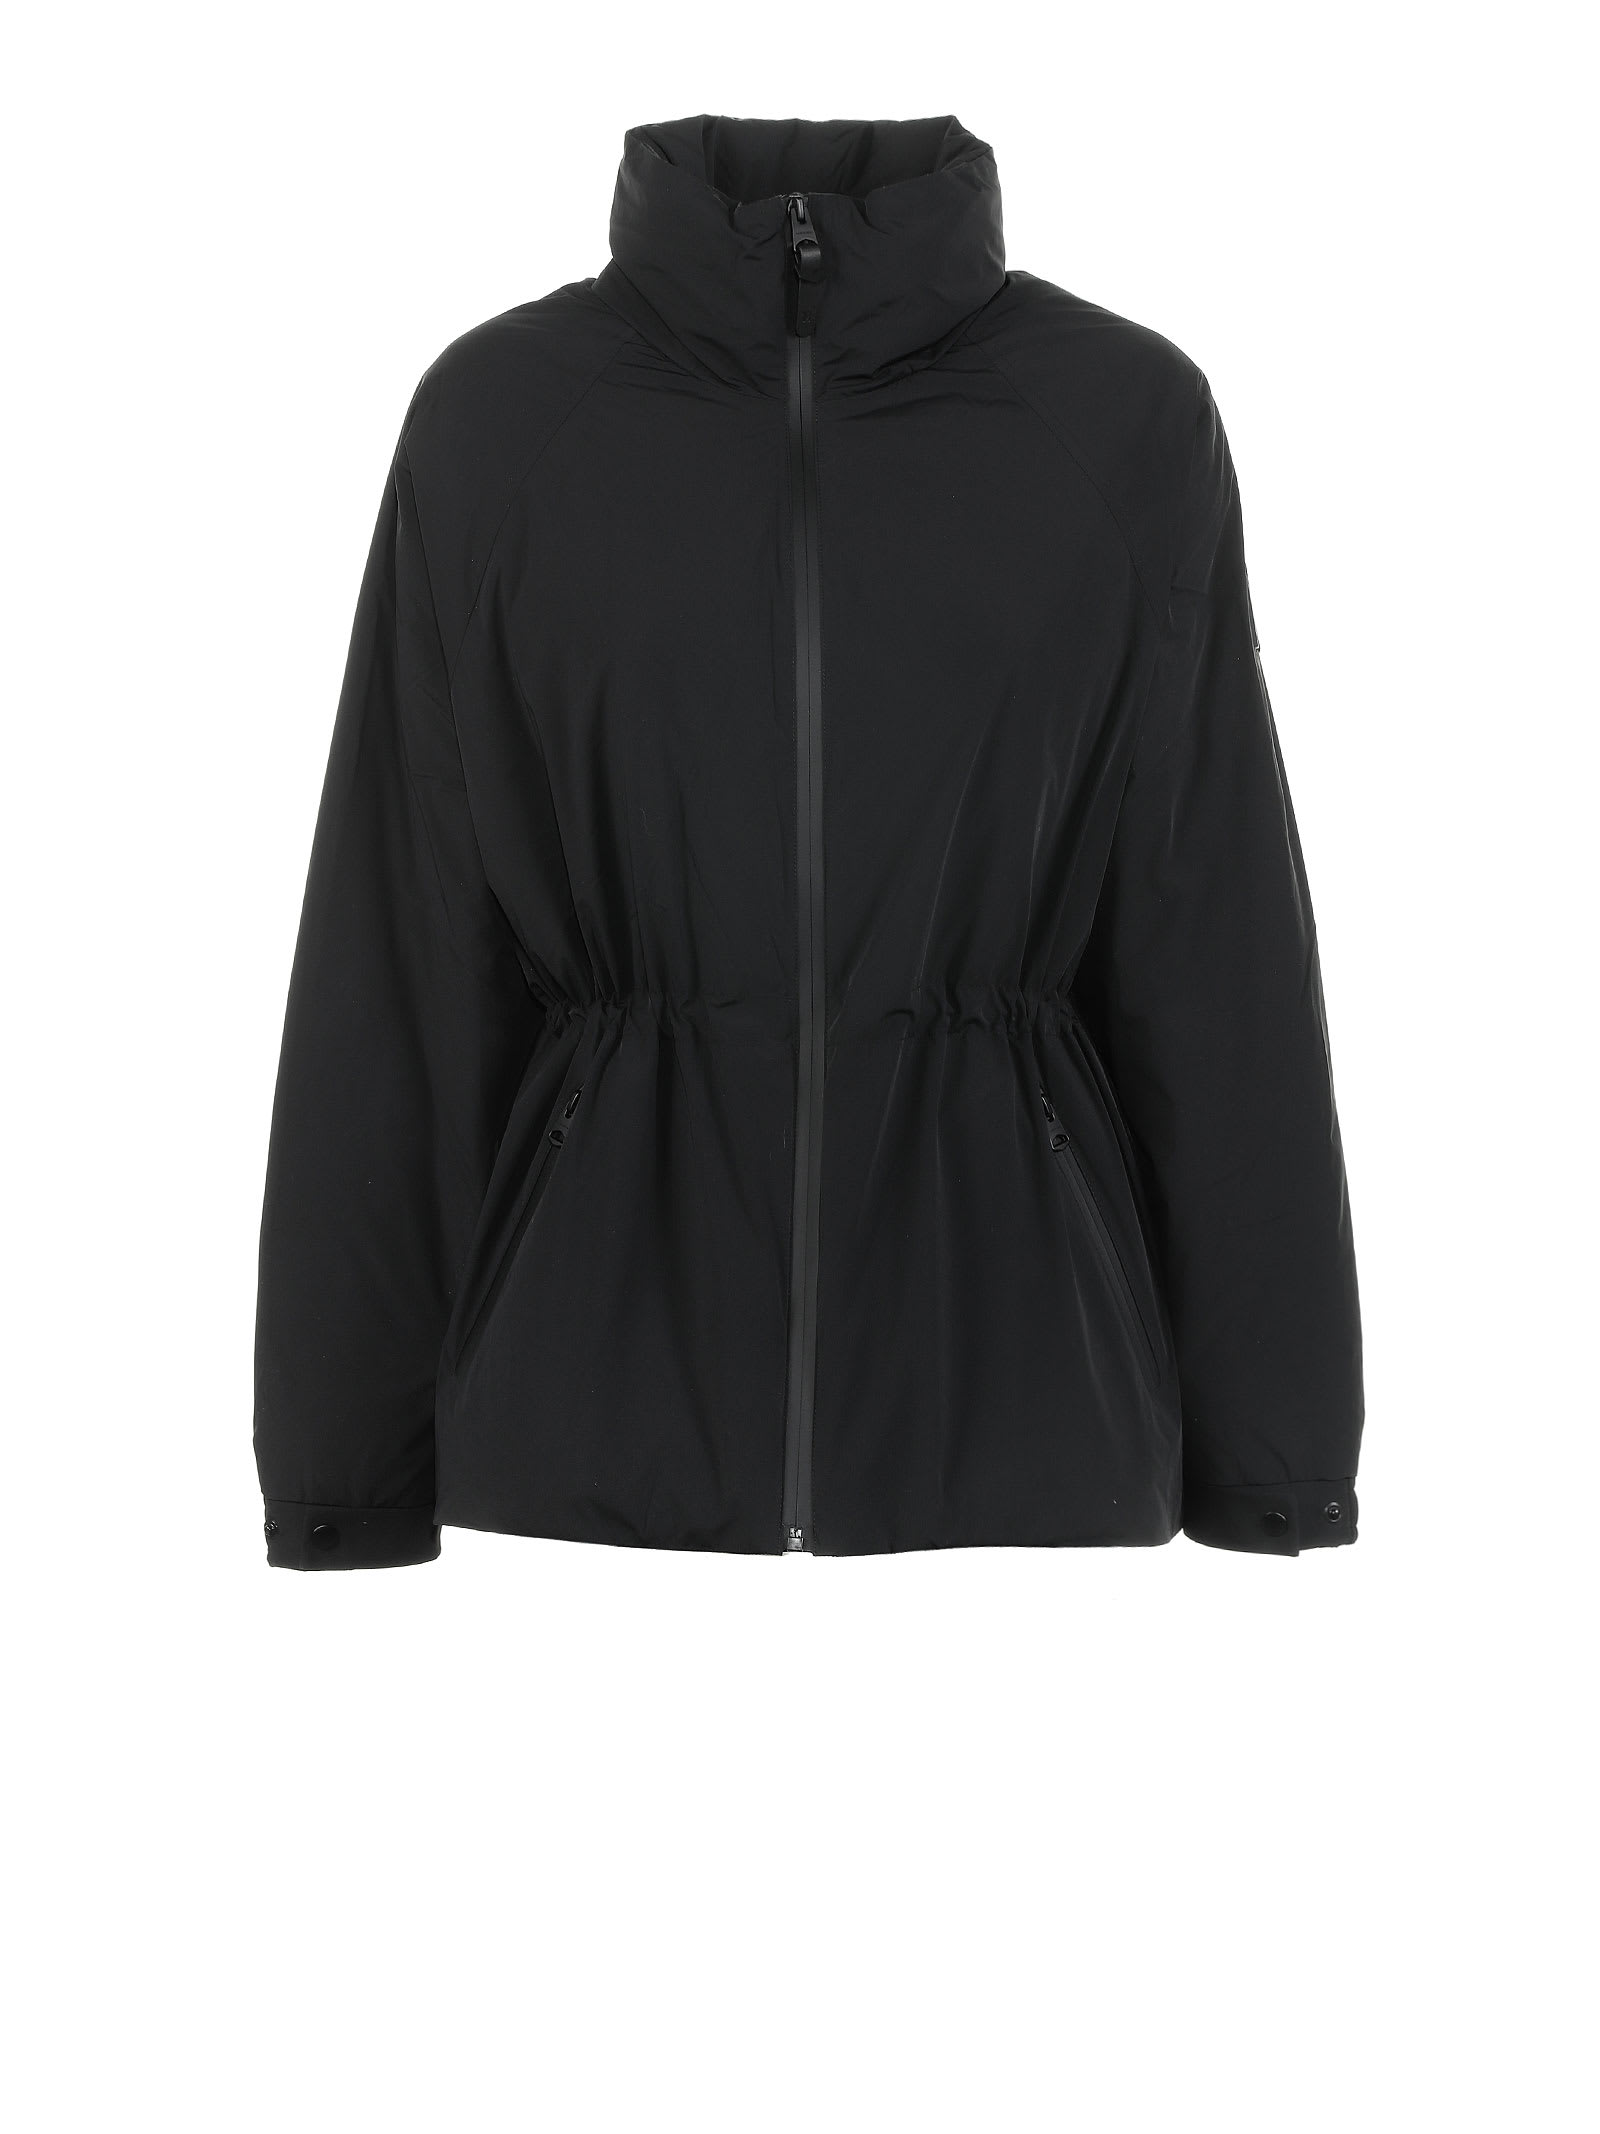 Mackage Jacket With Drawstring At The Waist